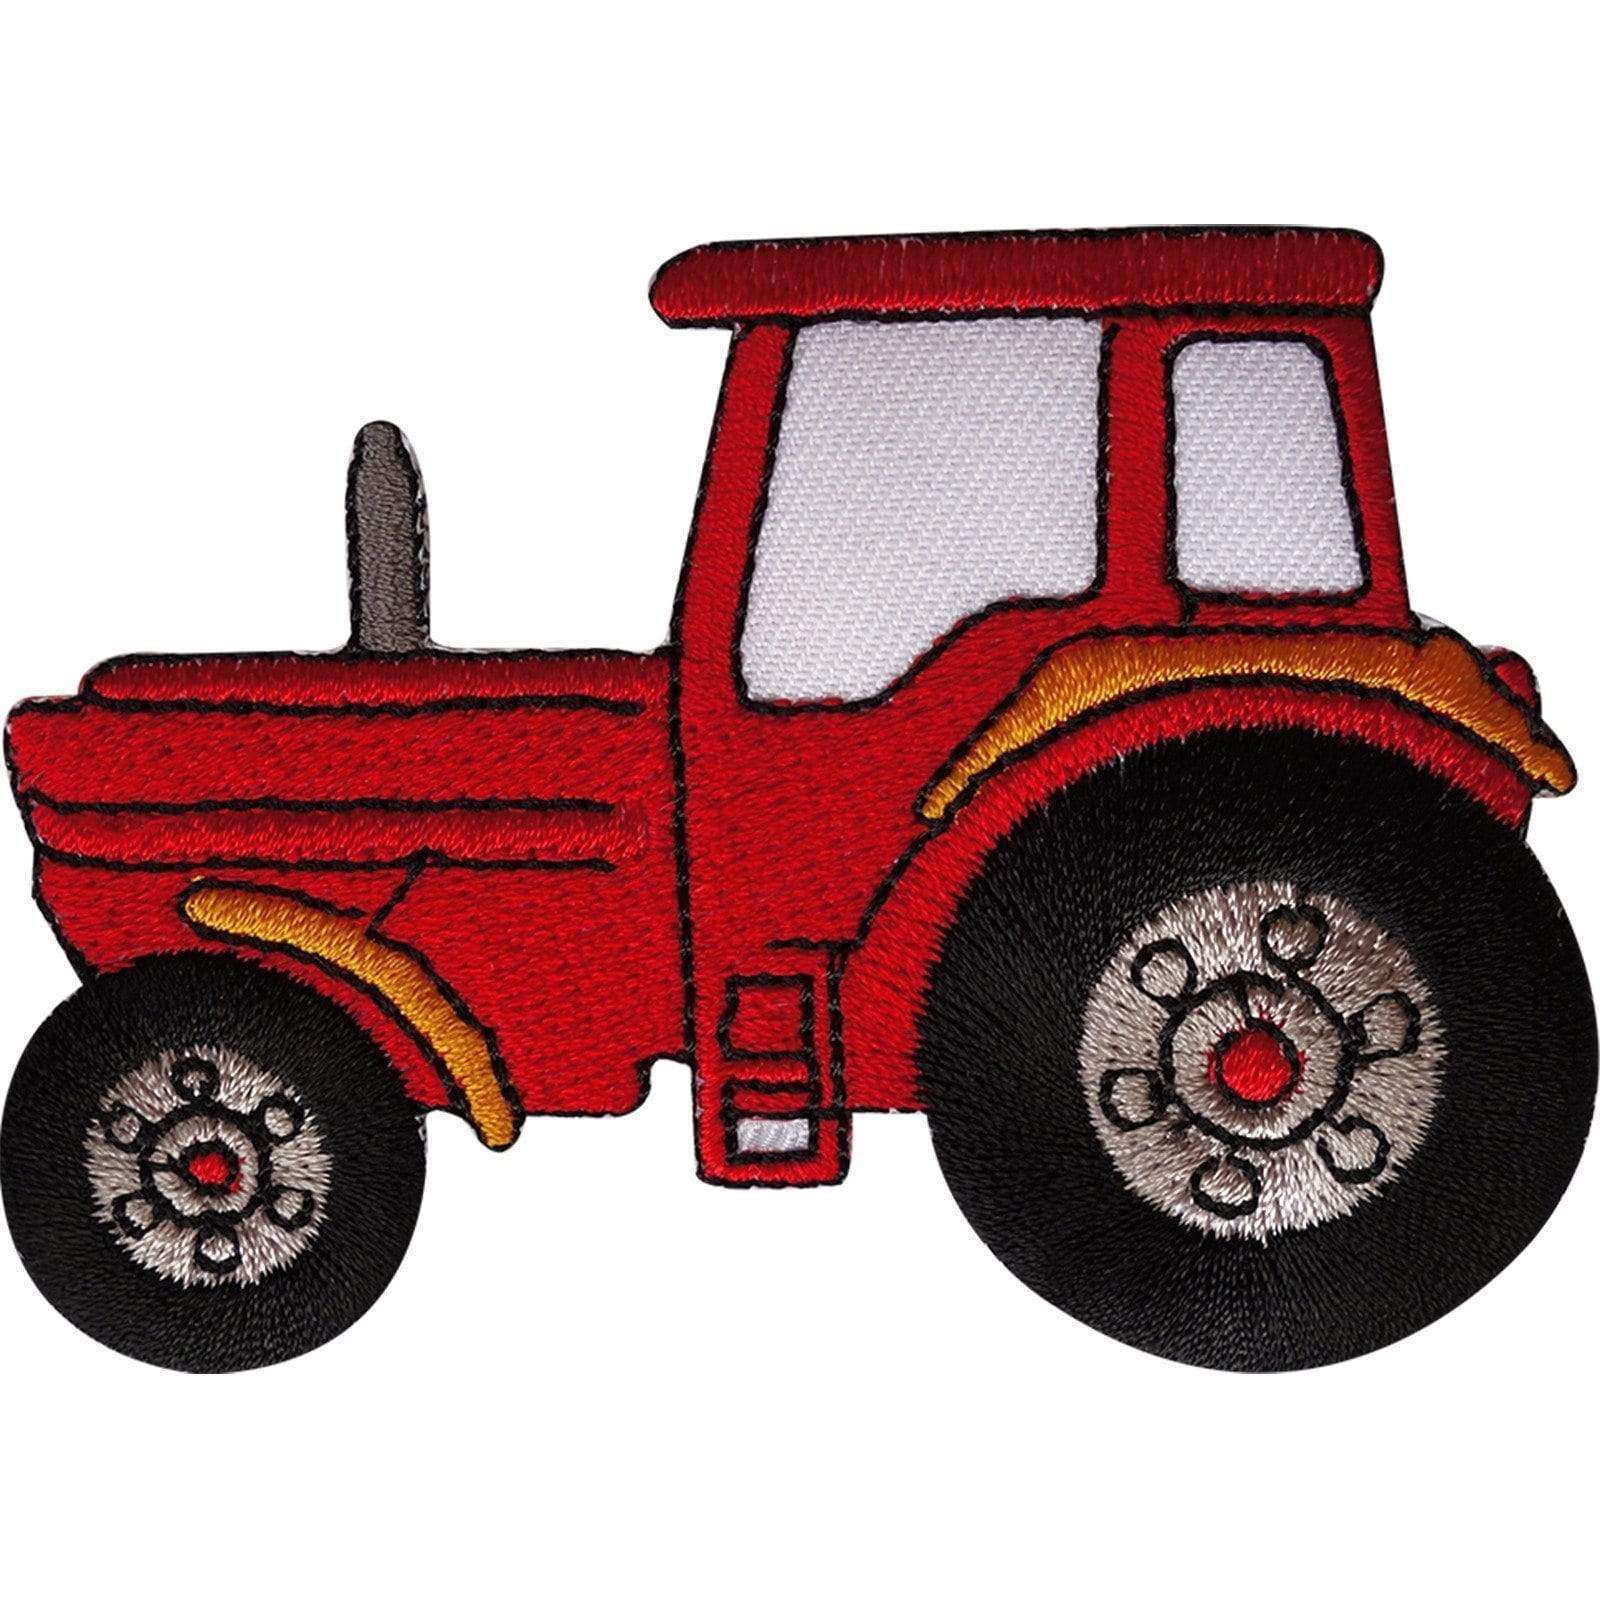 Tractor Patch Embroidered Badge Iron Sew On T Shirt Jeans Embroidery Applique